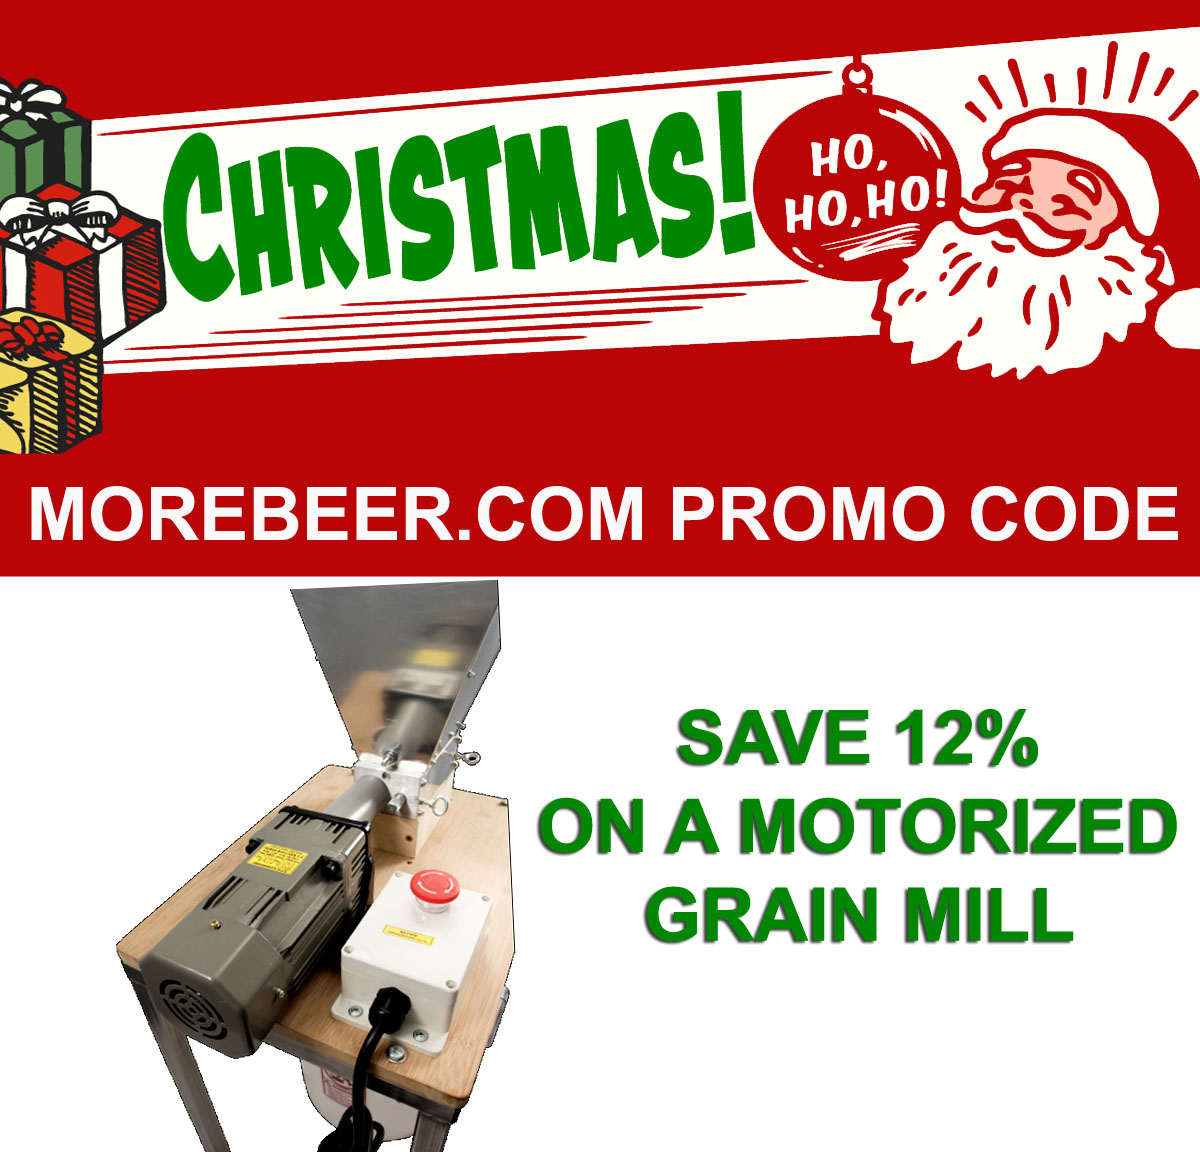  Home Brewer Promo Code for Save 12% On A Motorized Malt Mill at More Beer! Coupon Code